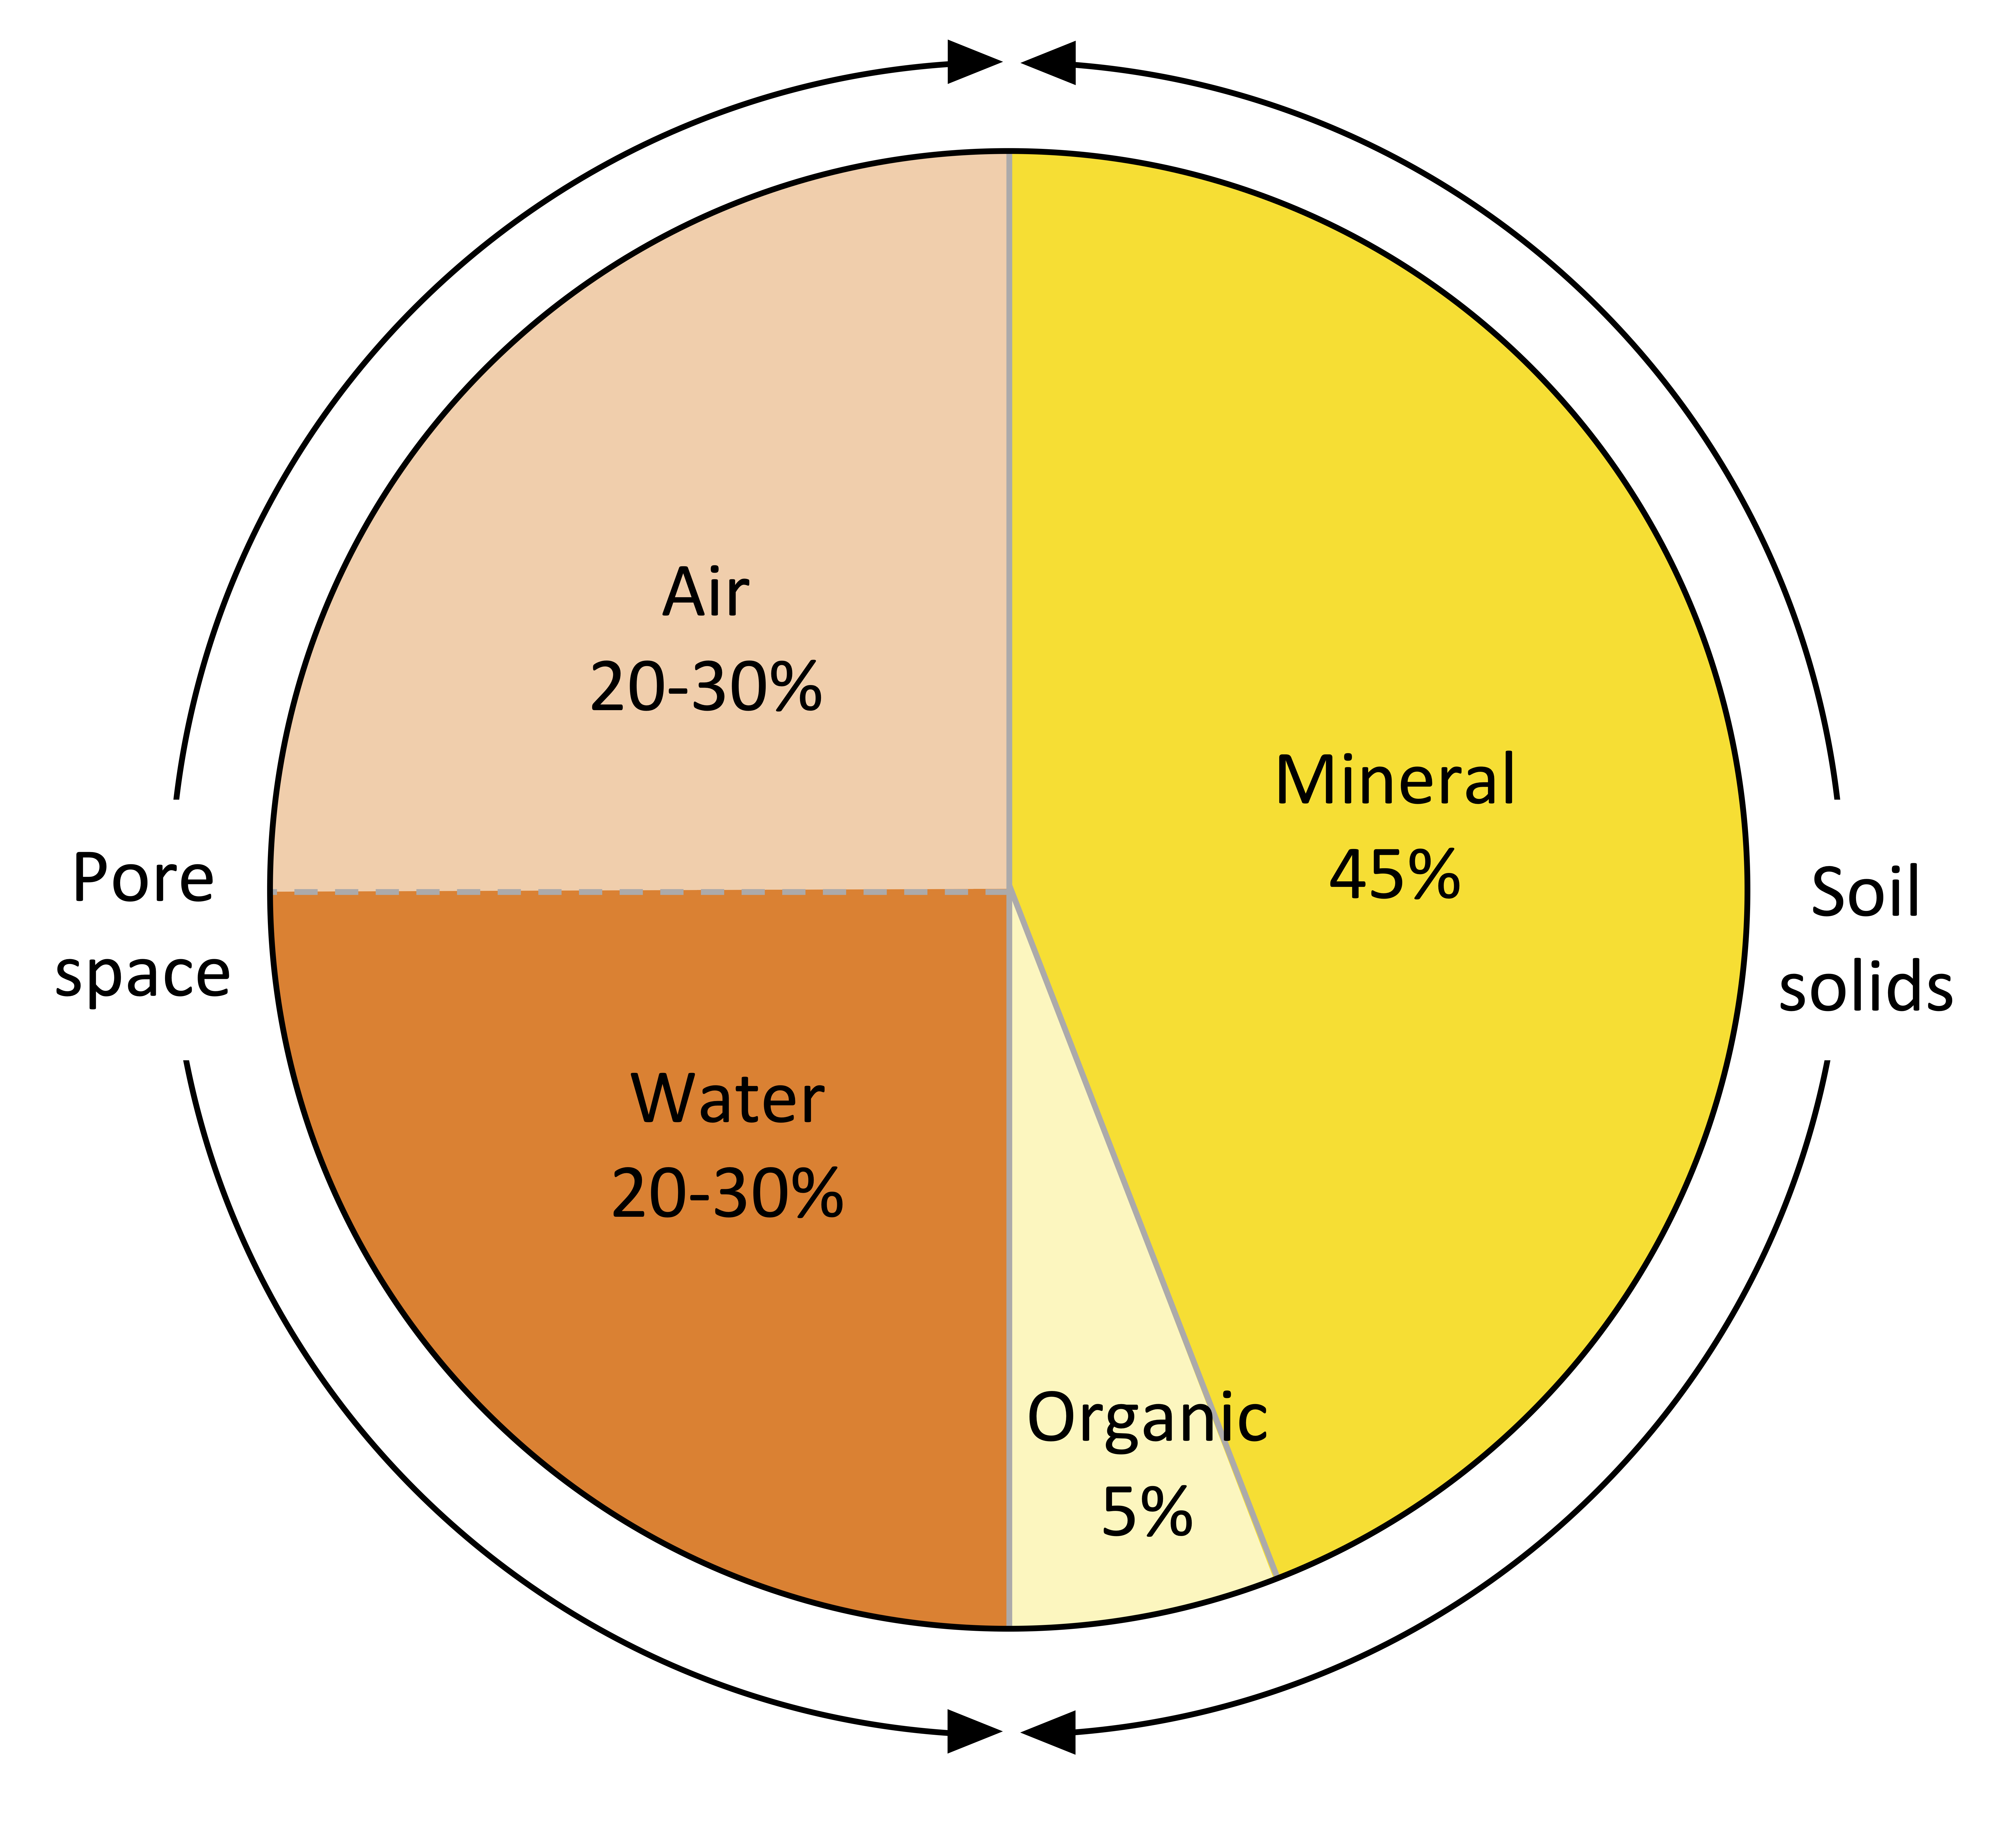 A circle diagram split into four sections of varying sizes showing the composition of good soil. One quarter section of the pie is labeled as Air, 20-30%. Another quarter section of the pie is labeled Water, 20-30%. The larger section is labeled Mineral, 45%. The remaining section is labeled Organic, 5%. Air and Water are sectioned as Pore Space. Mineral and Organic are sectioned as soil solids.